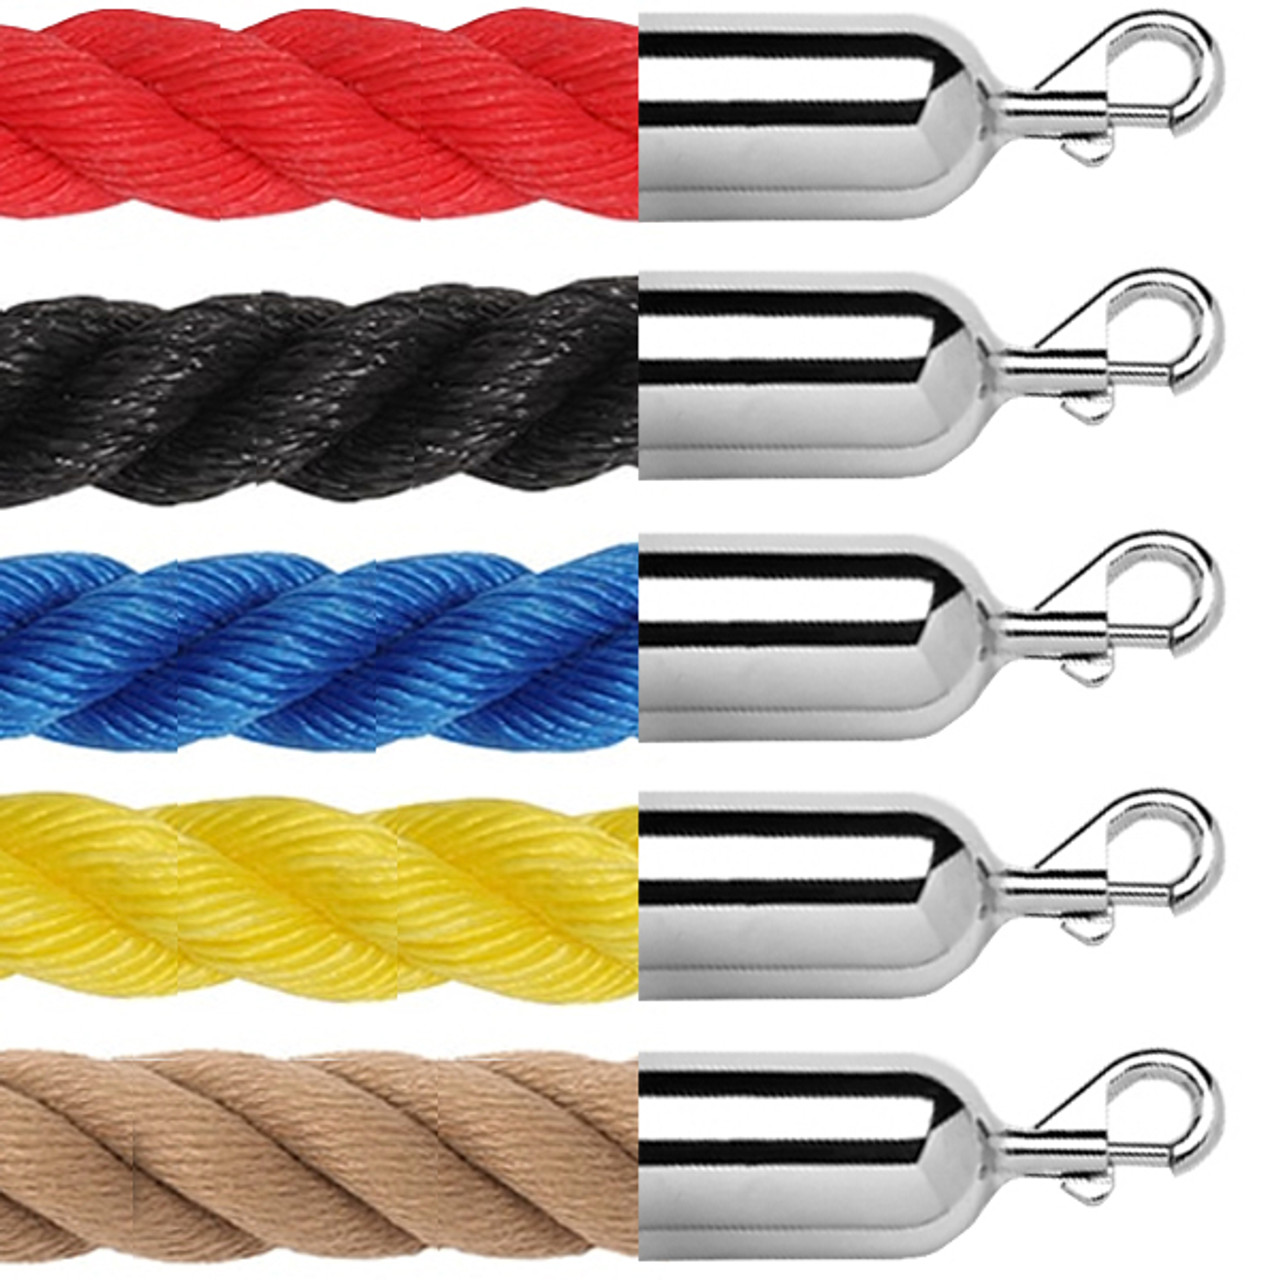 1.5 Twisted Poly Stanchion Ropes